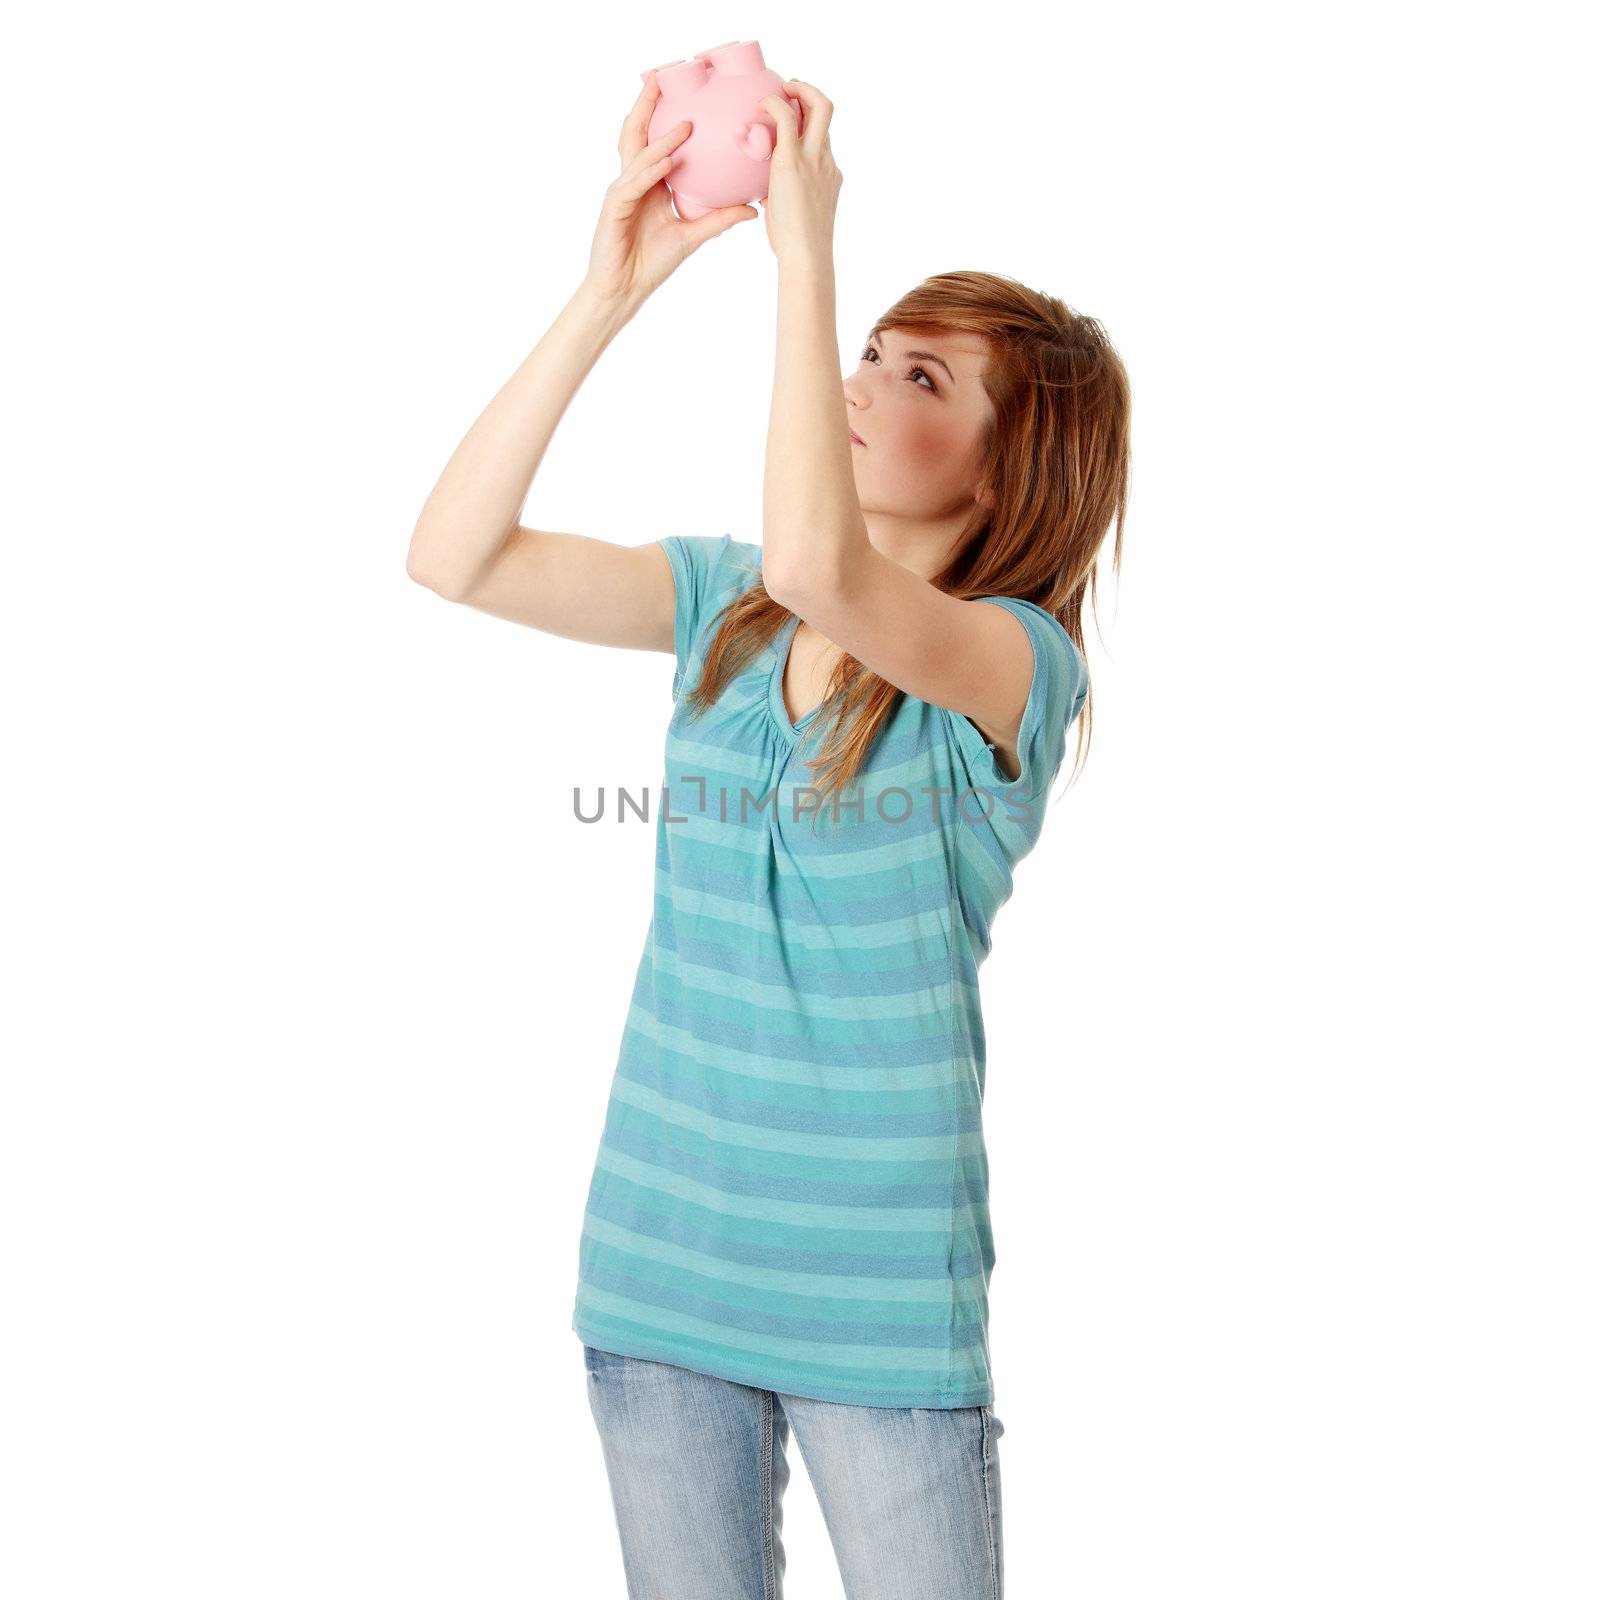 Young woman trying to get money from her piggy bank, isolated on white background